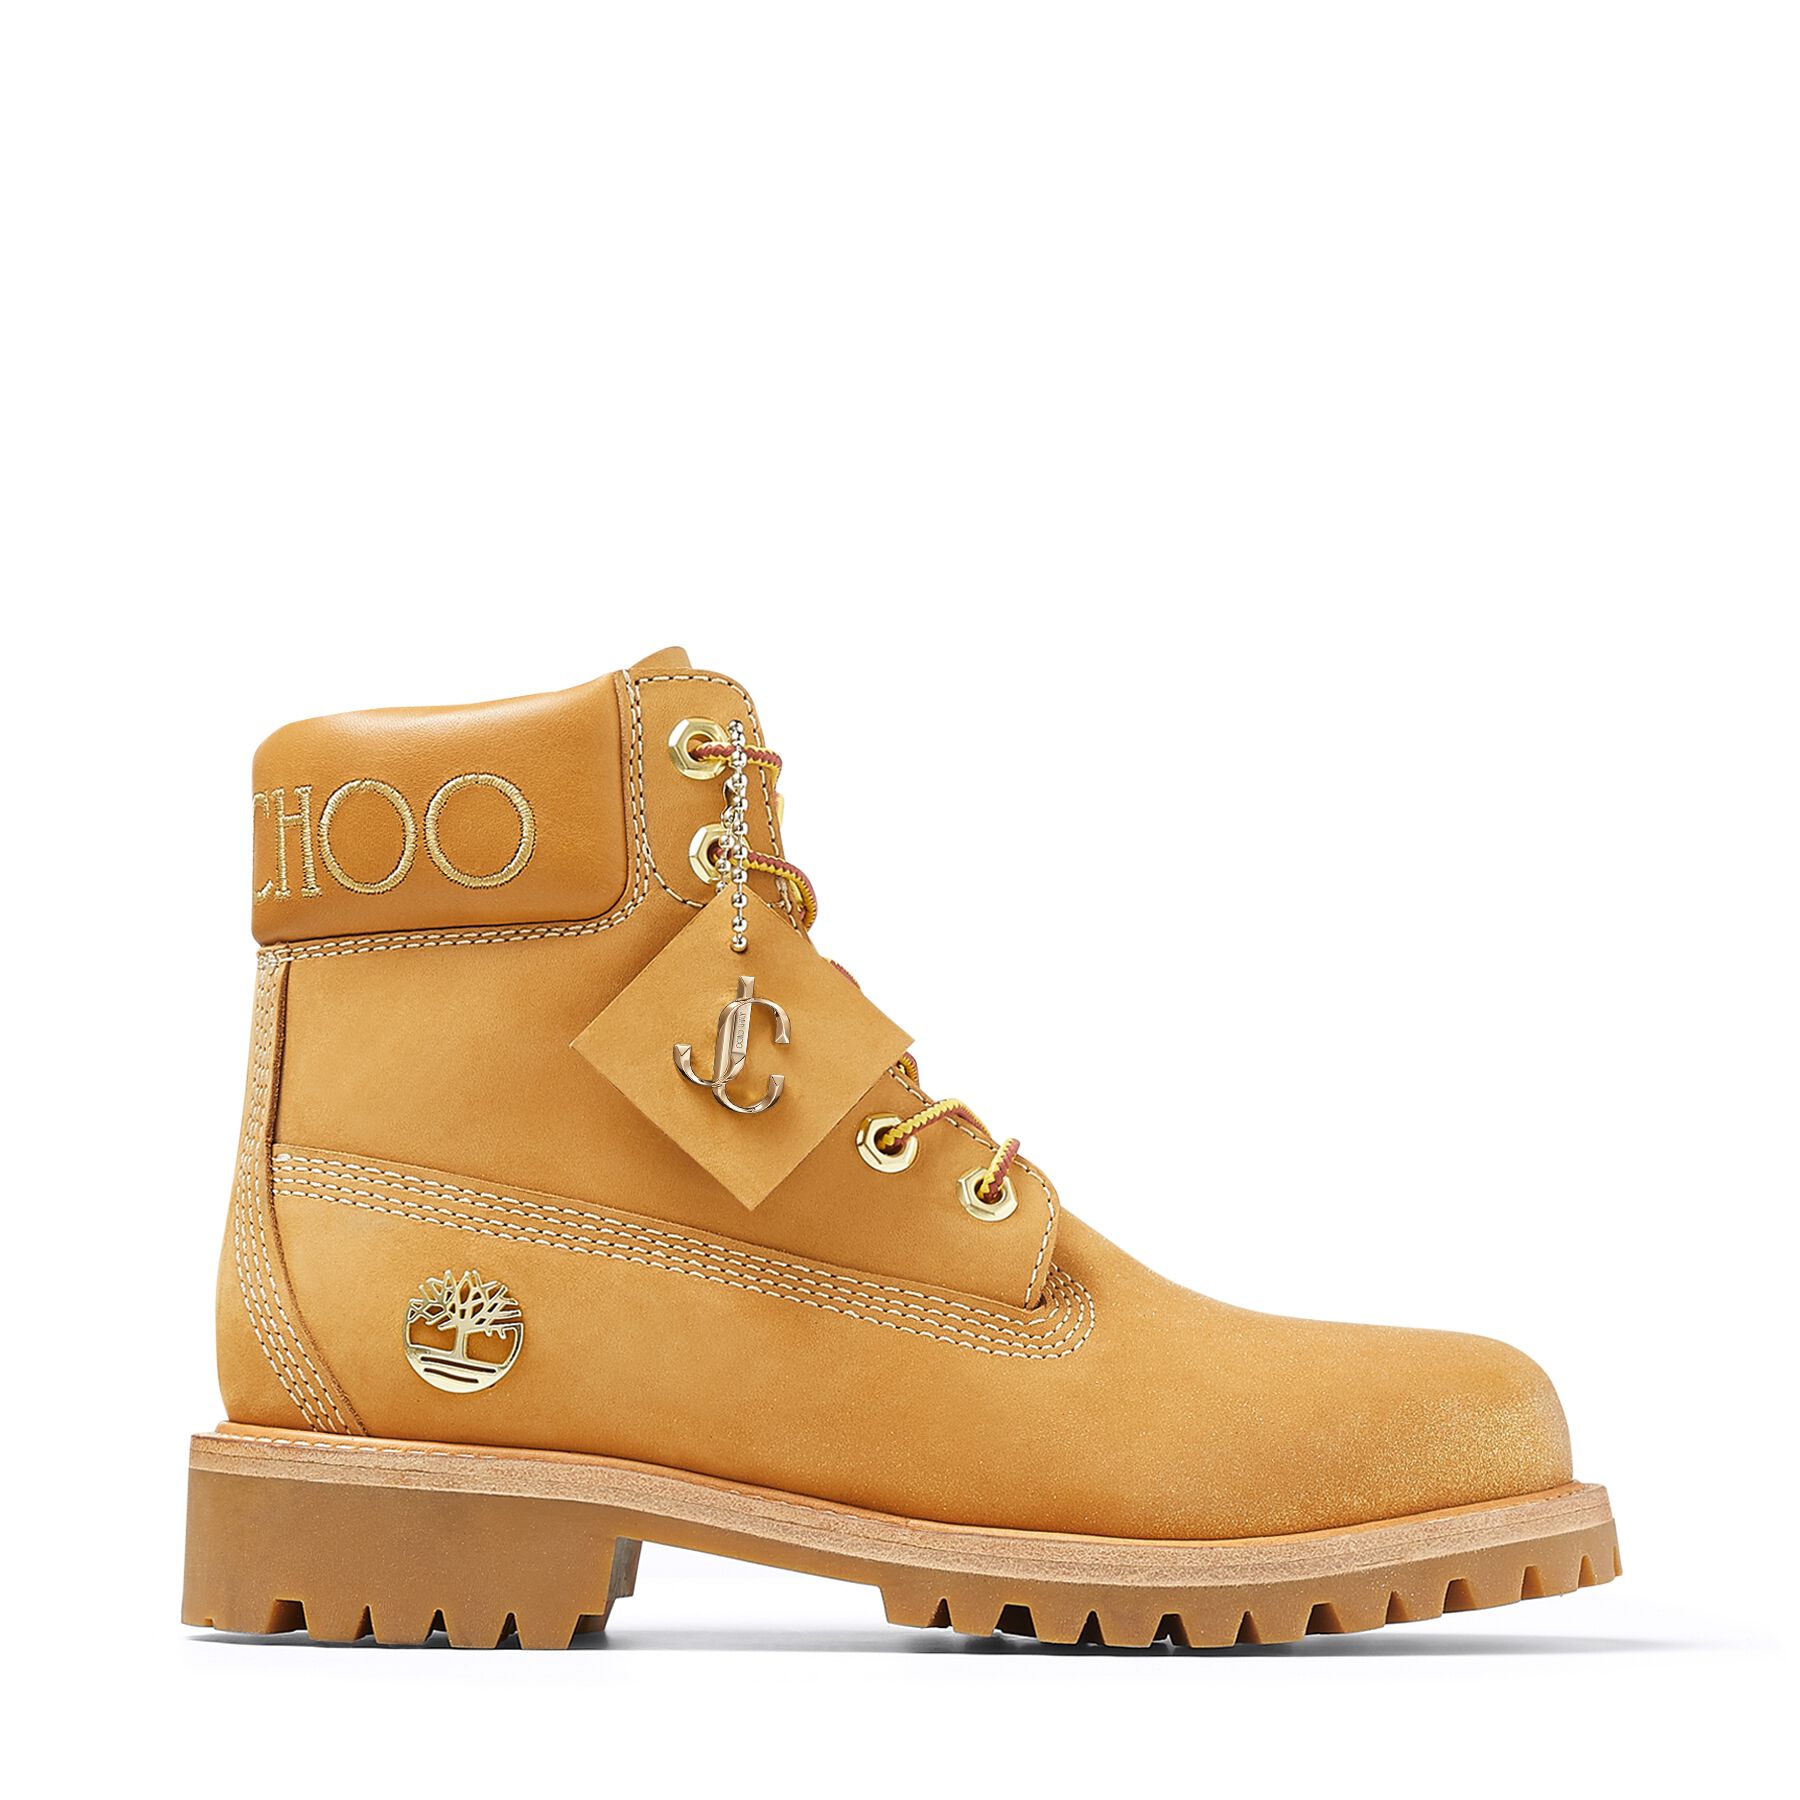 Buy > timberland nubuck boots > in stock